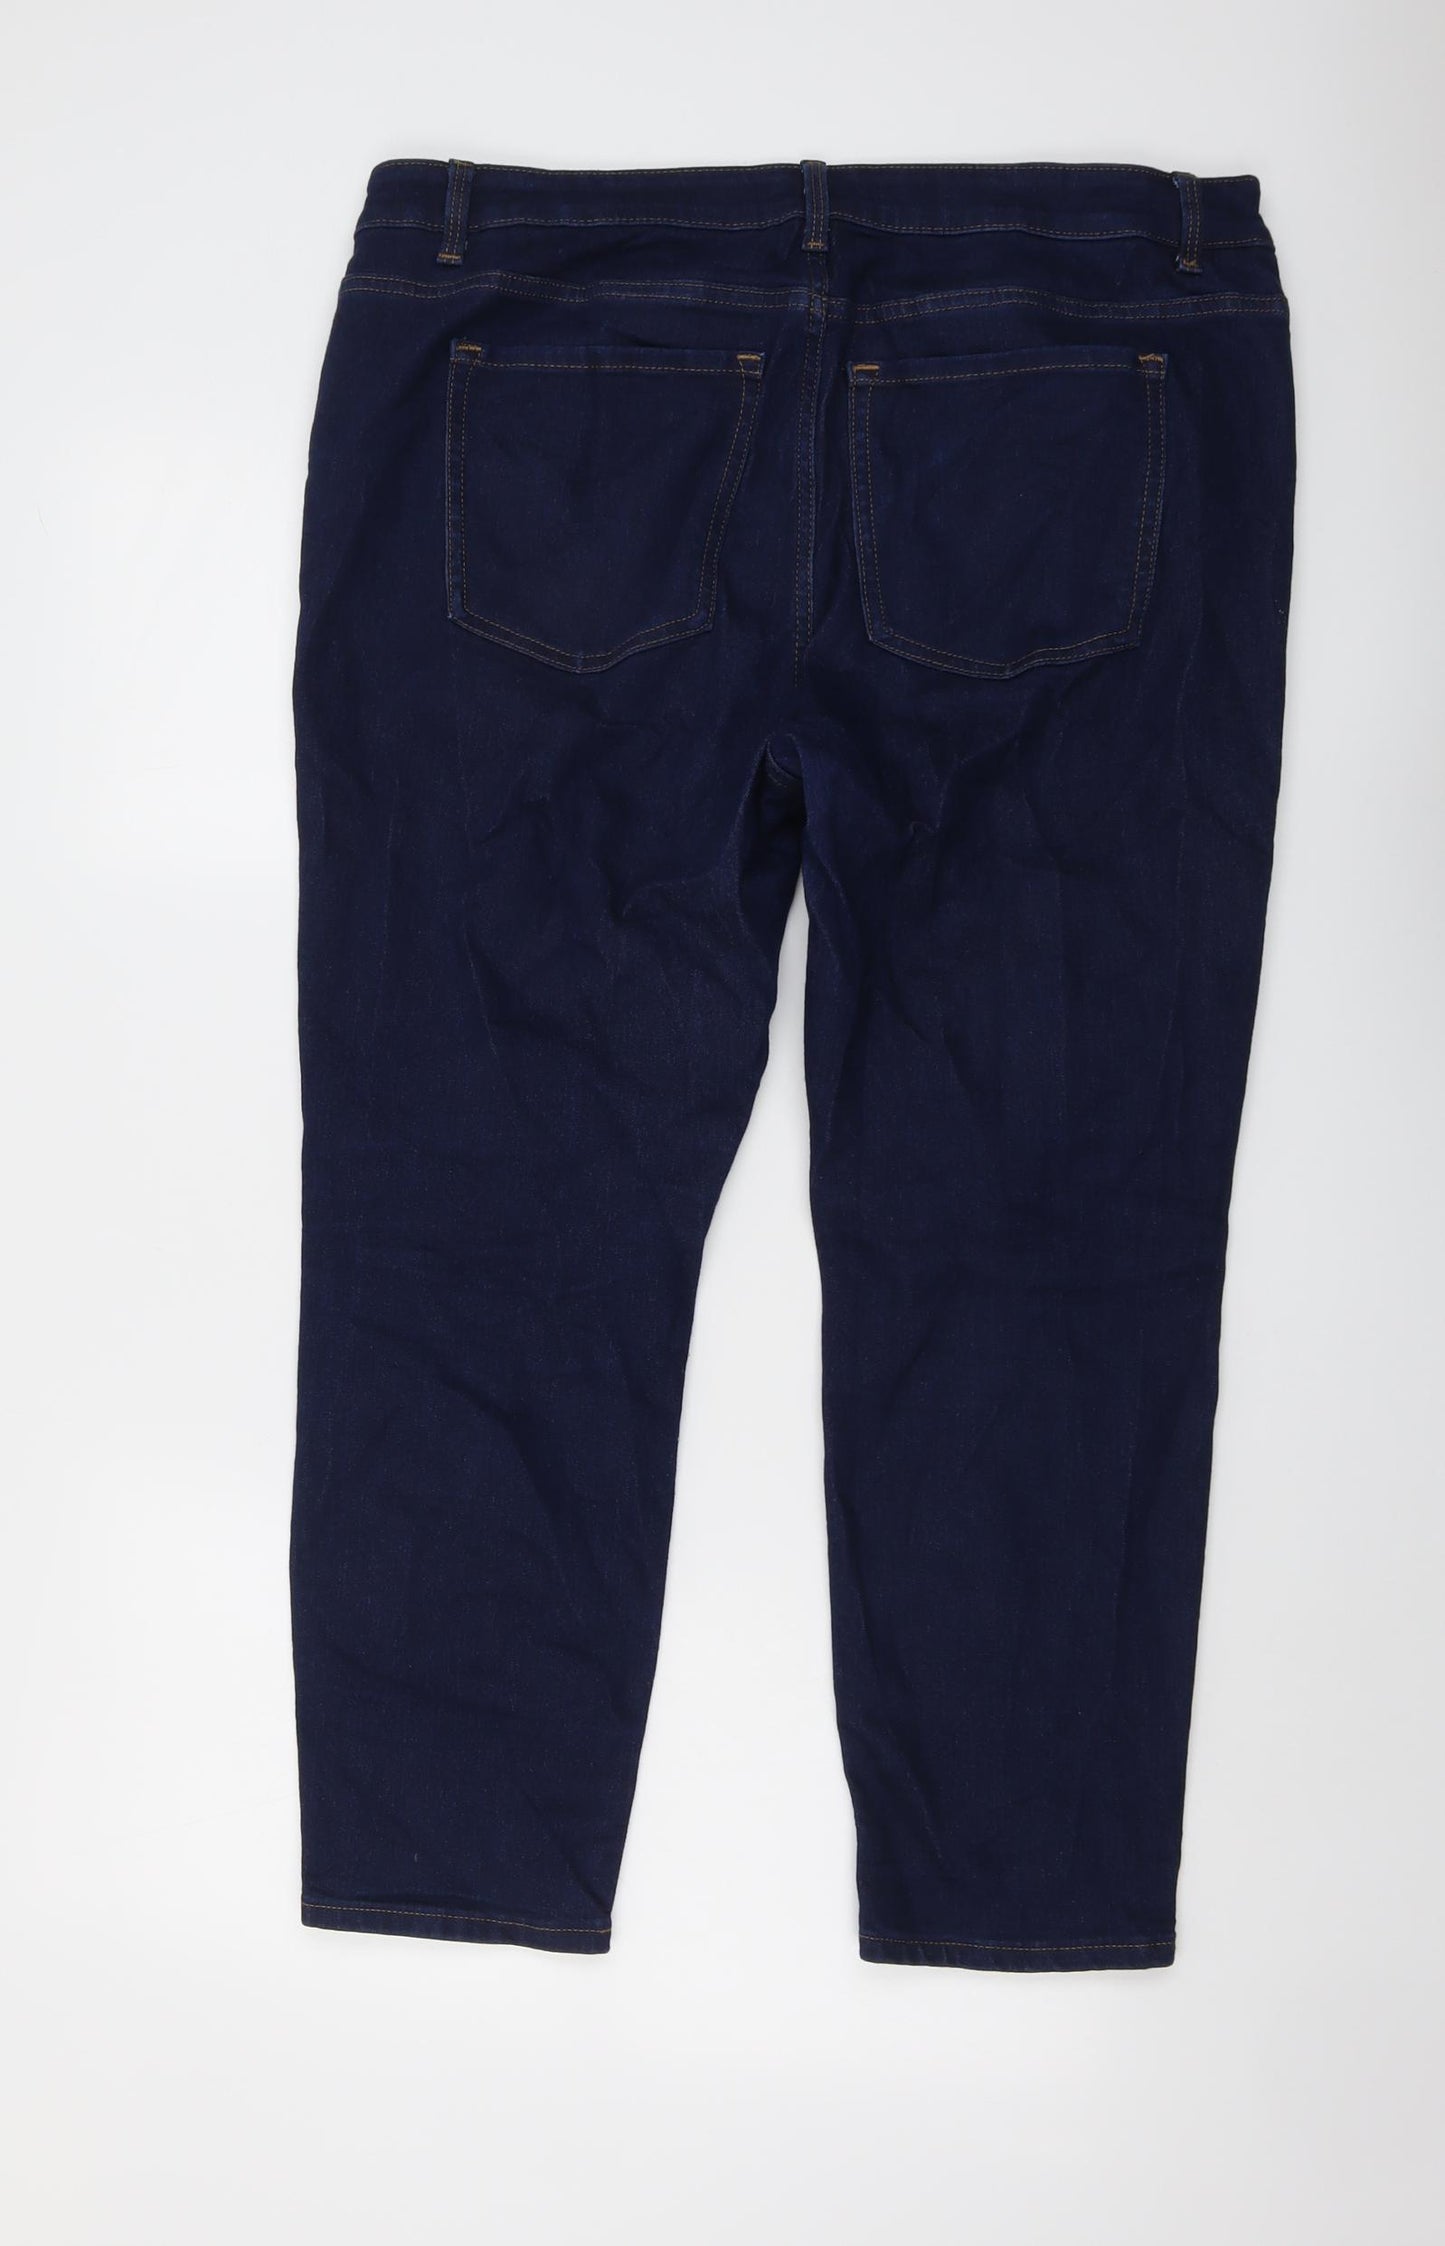 Marks and Spencer Womens Blue Cotton Skinny Jeans Size 18 L26 in Slim Button